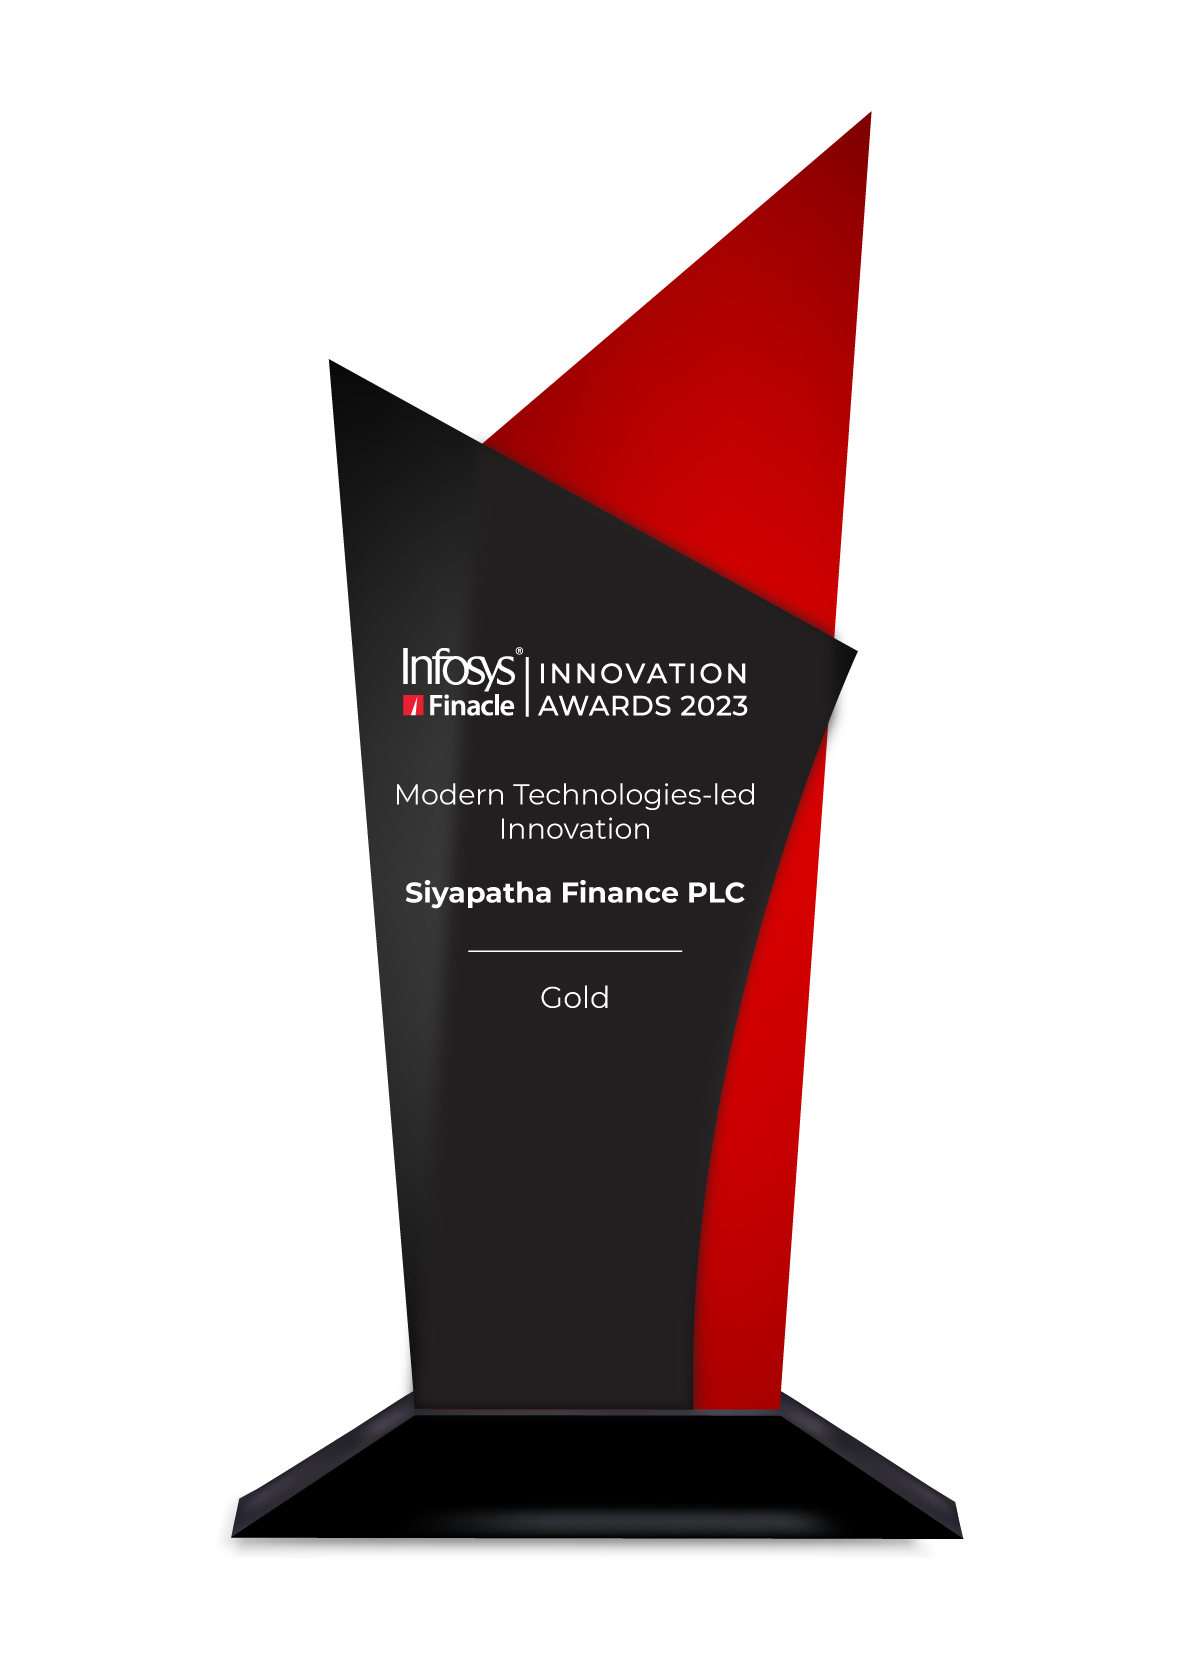 Awarded in the Gold Category for modern technologies-led innovation